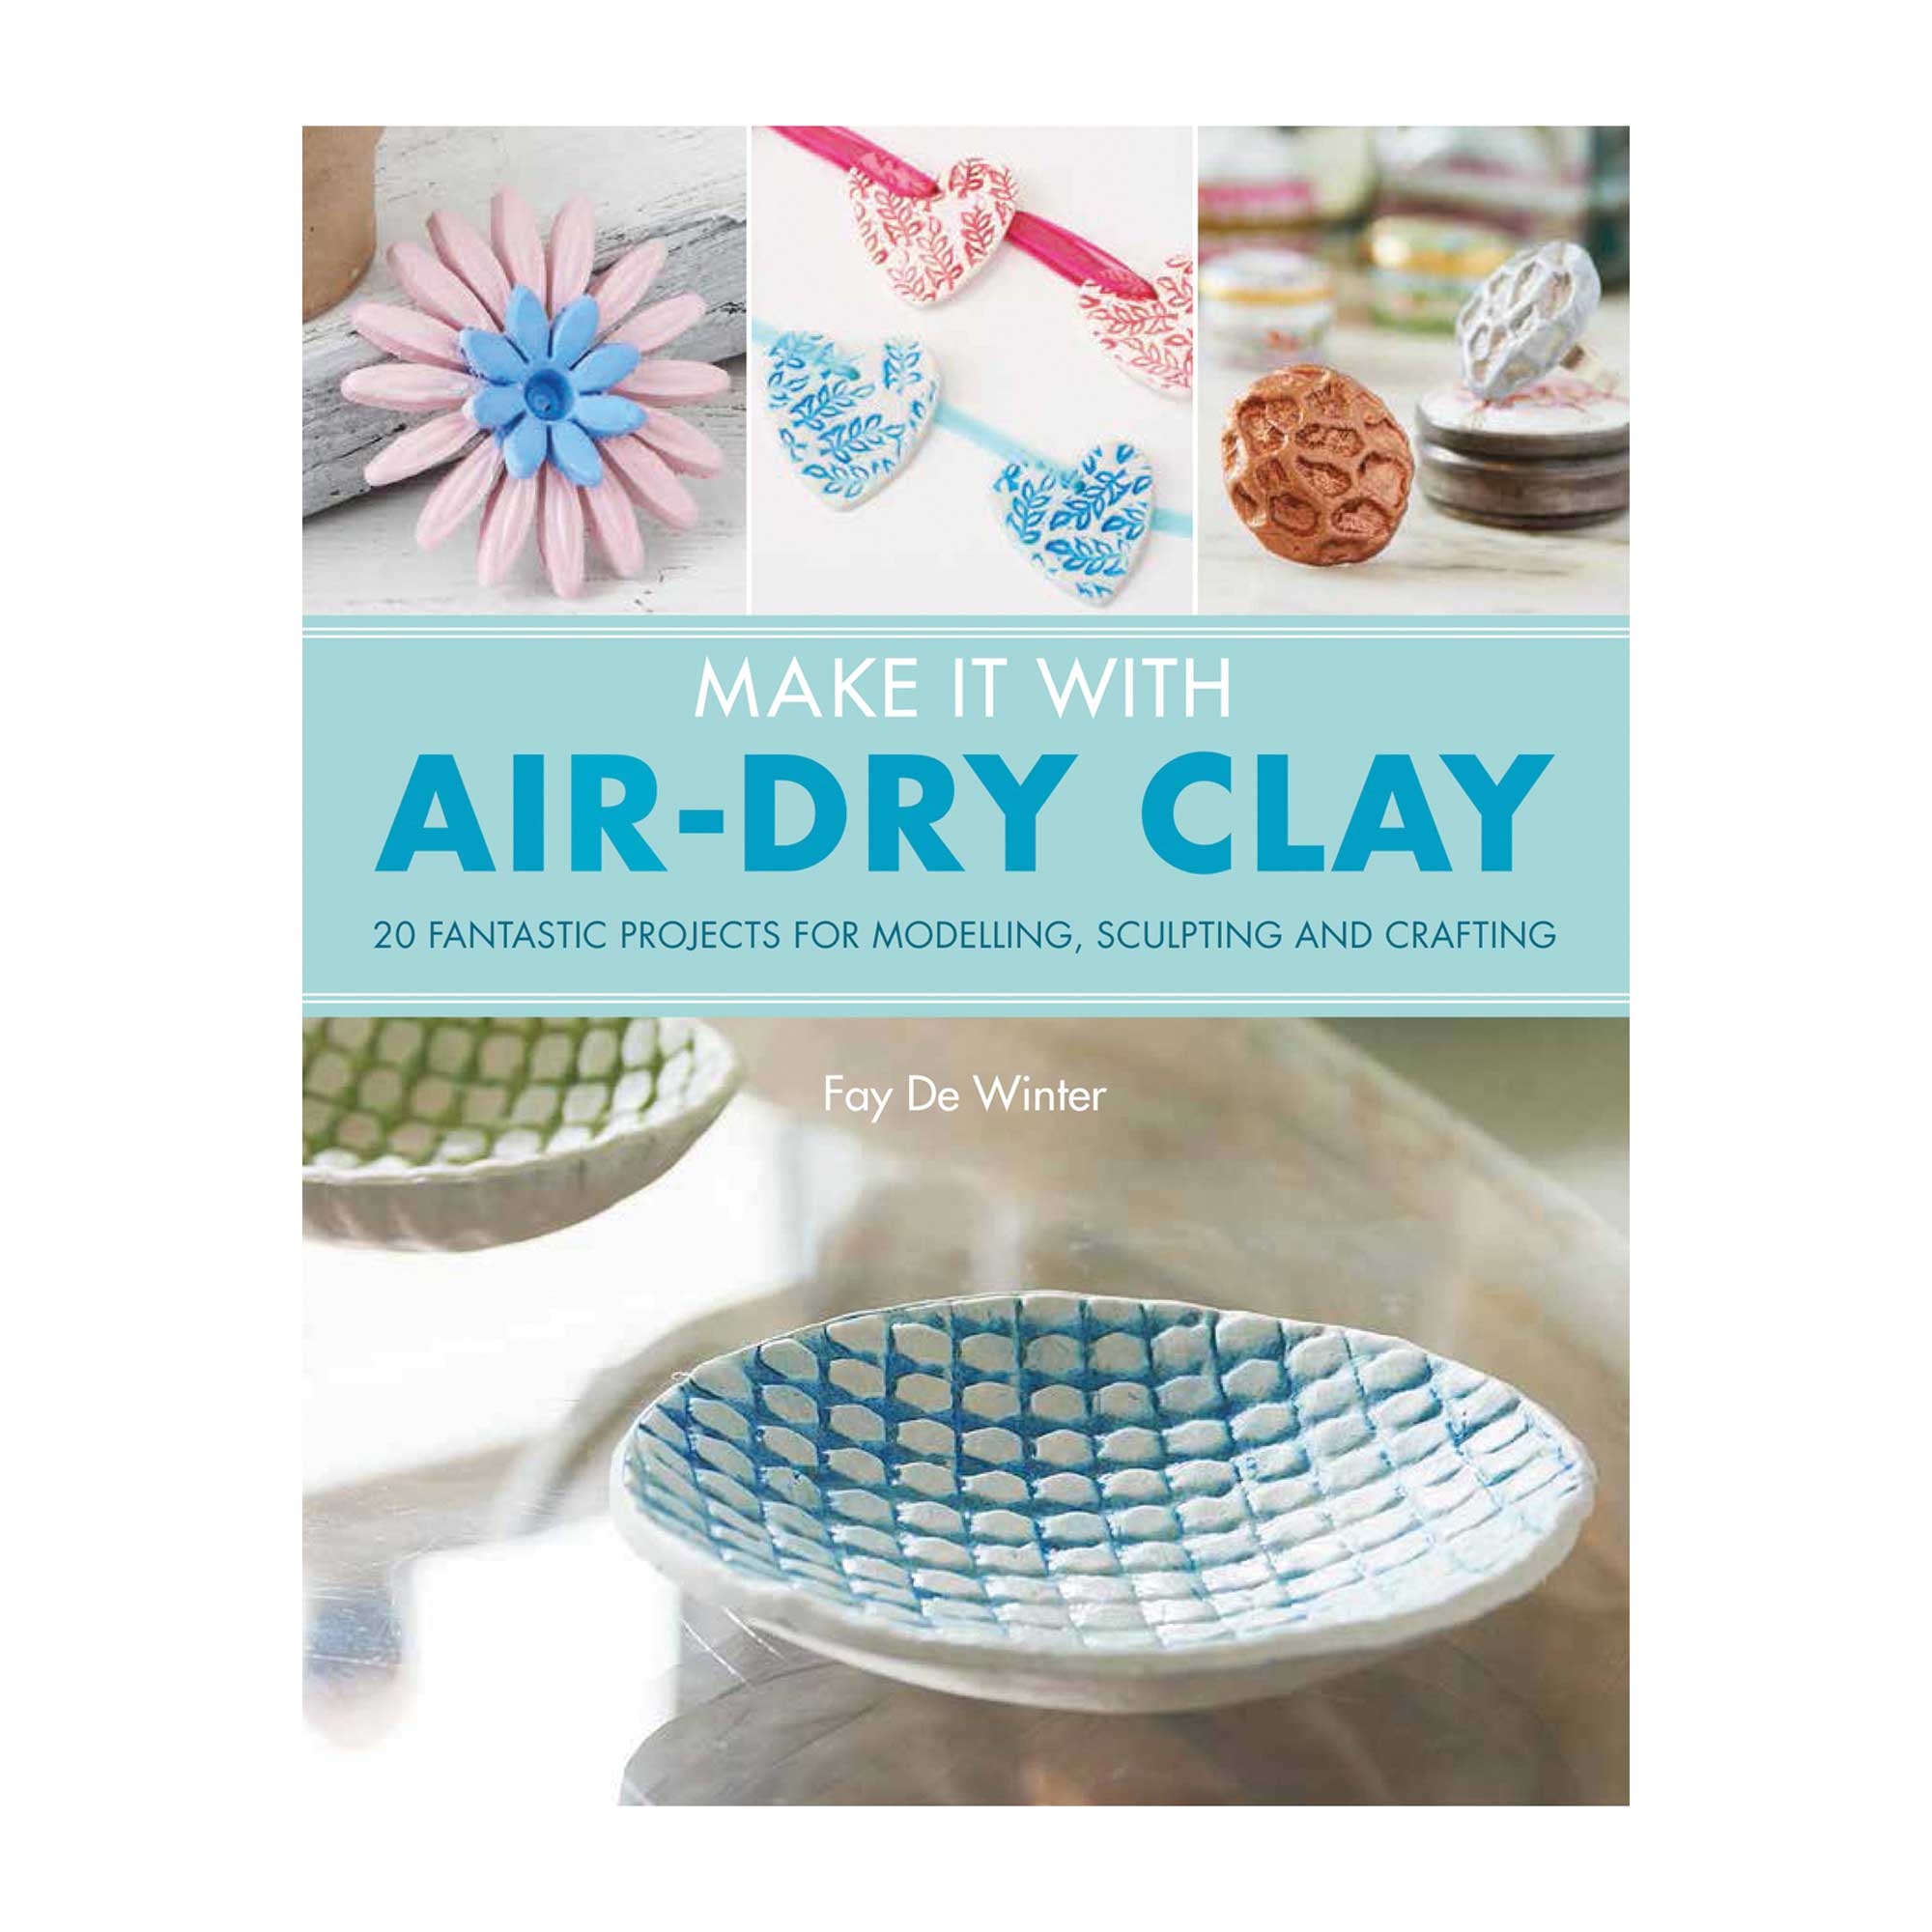 Make It With Air-Dry Clay - Fay De Winter